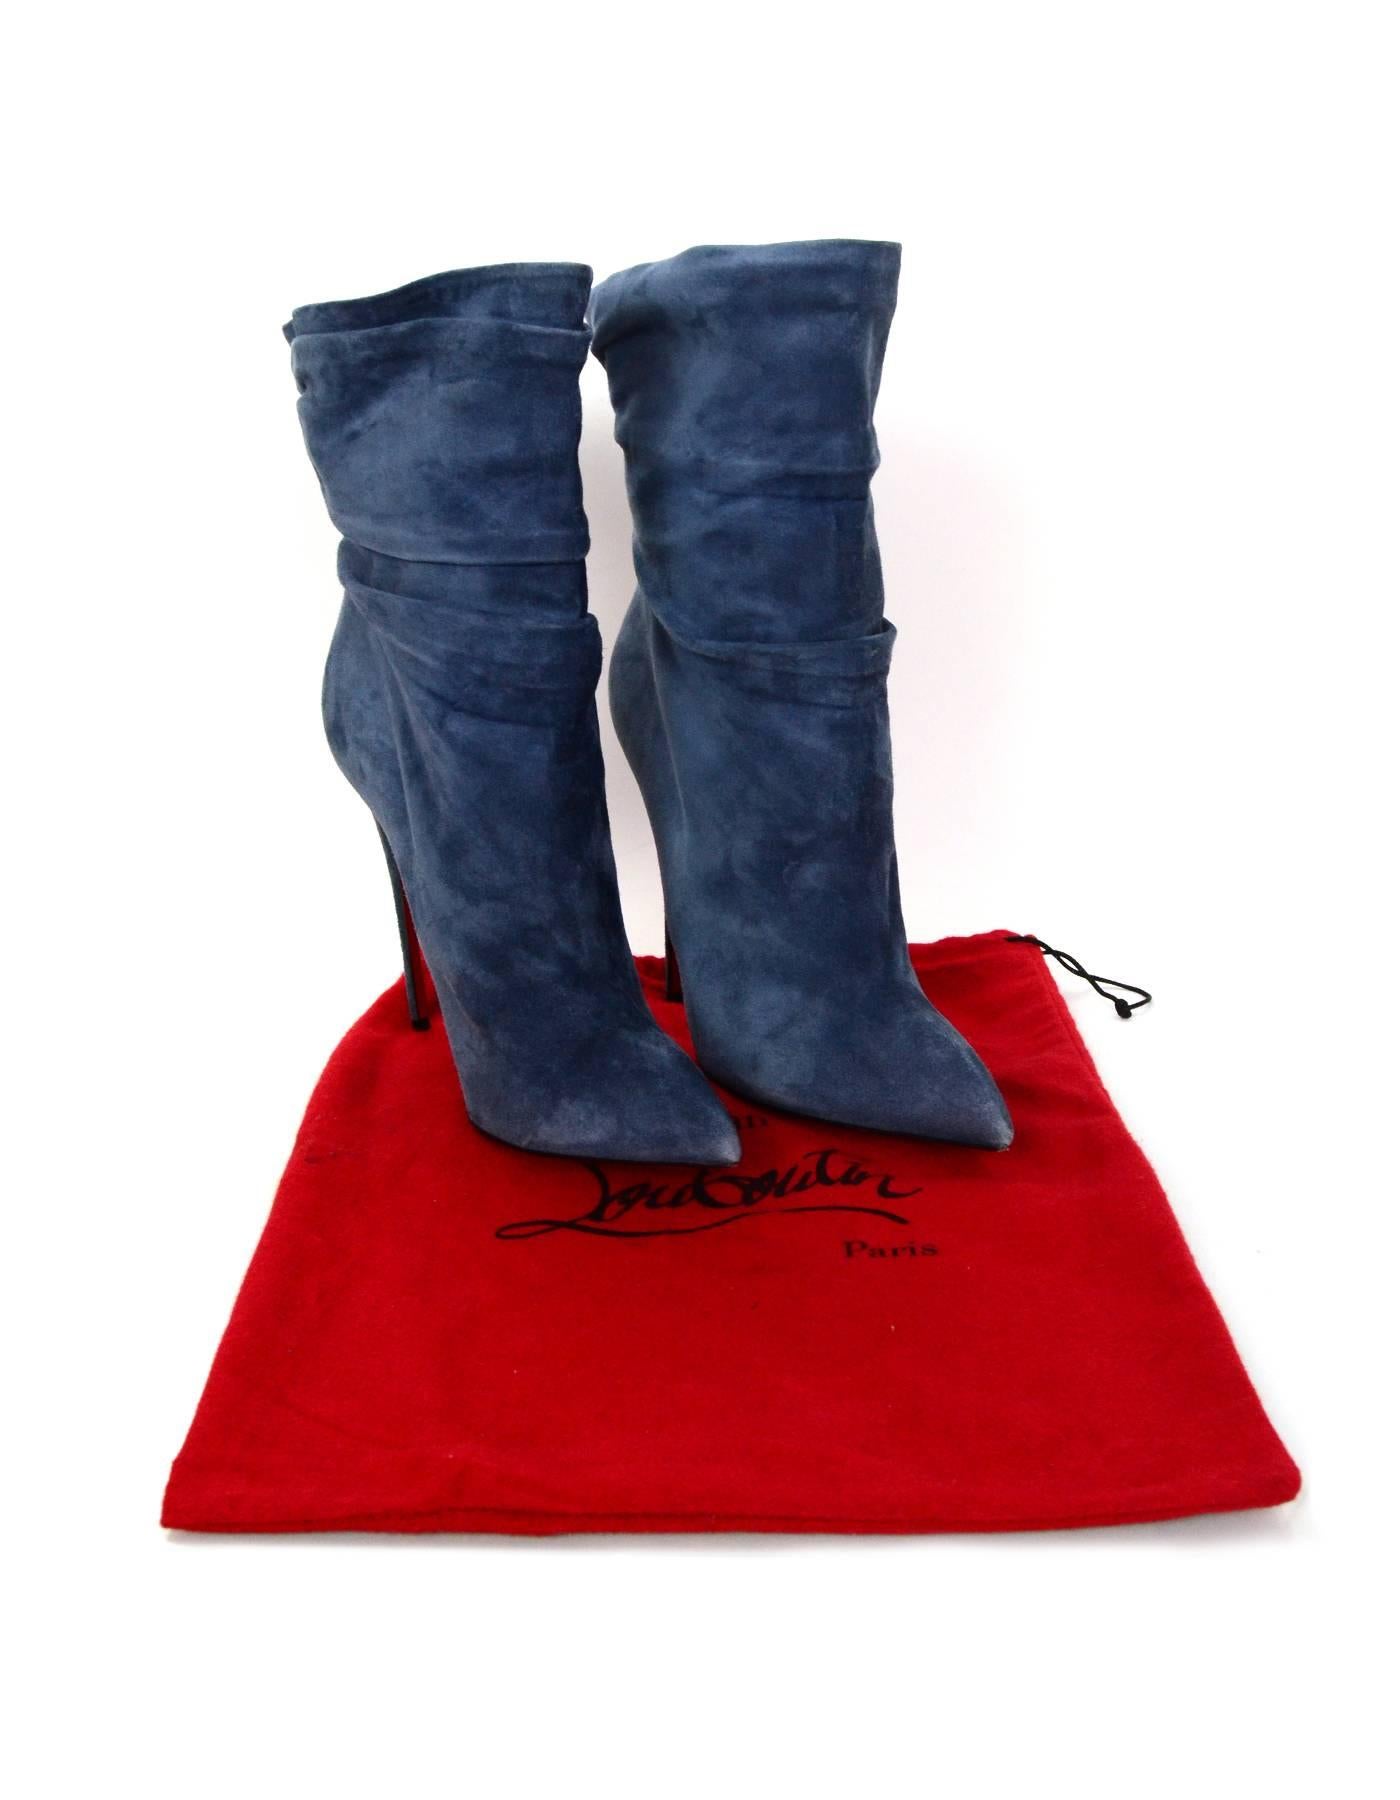 Christian Louboutin Blue Suede Short Ruched Boots sz 41 w/DB 3